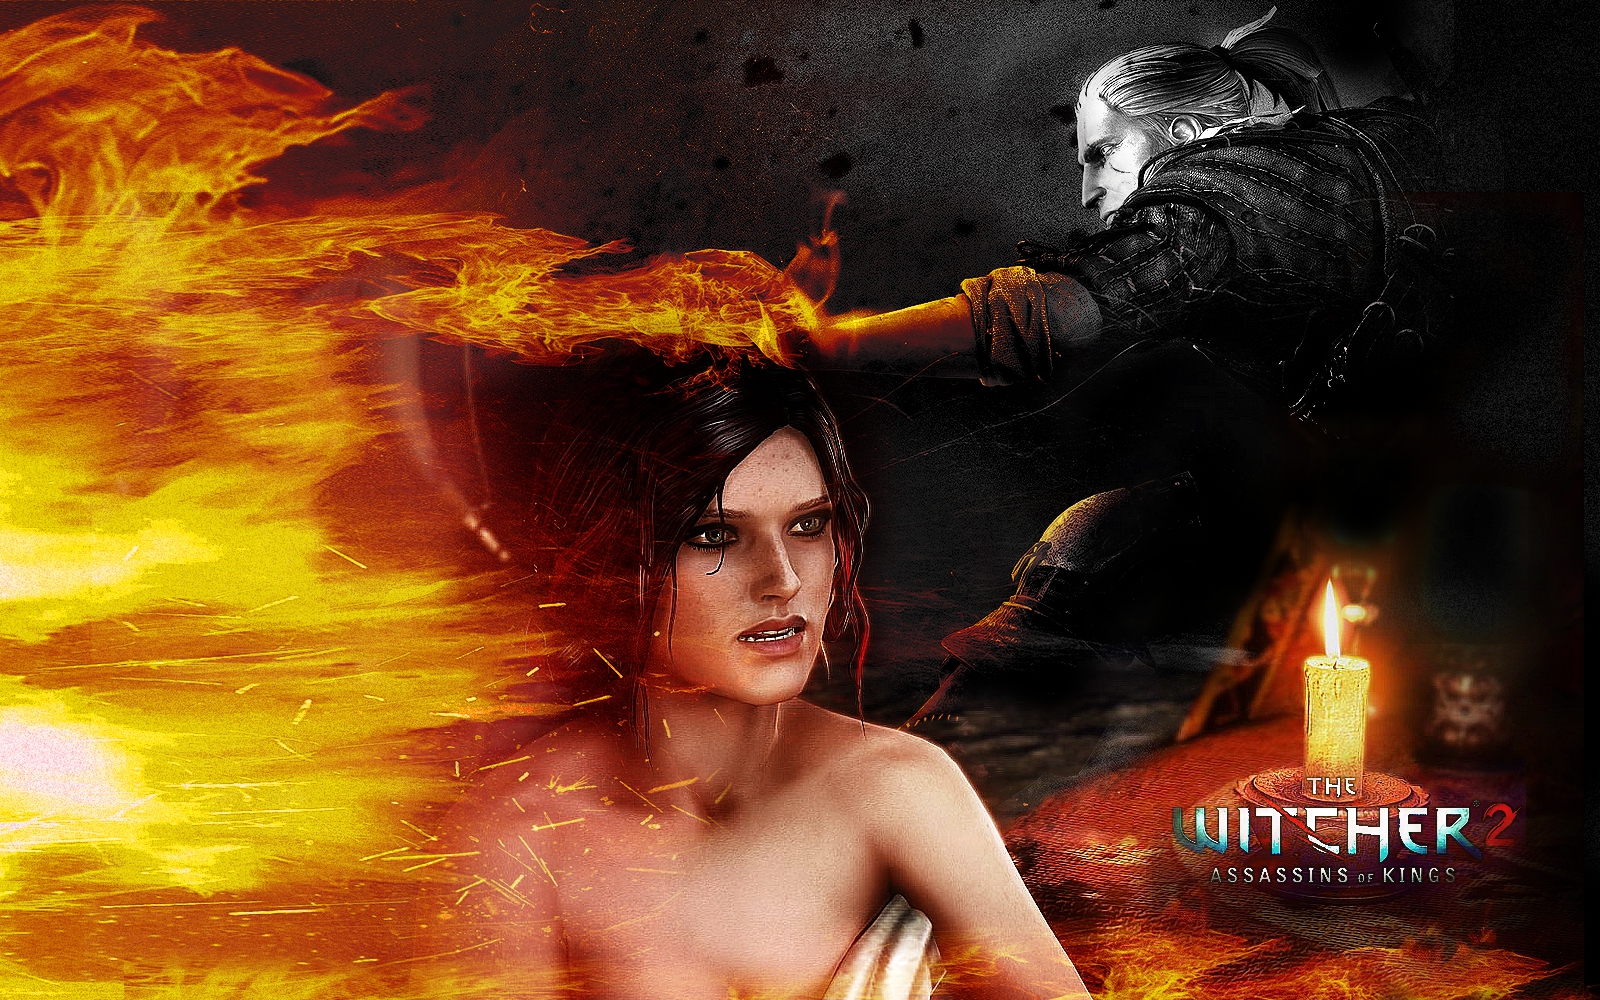 video game, the witcher 2: assassins of kings, the witcher, triss merigold